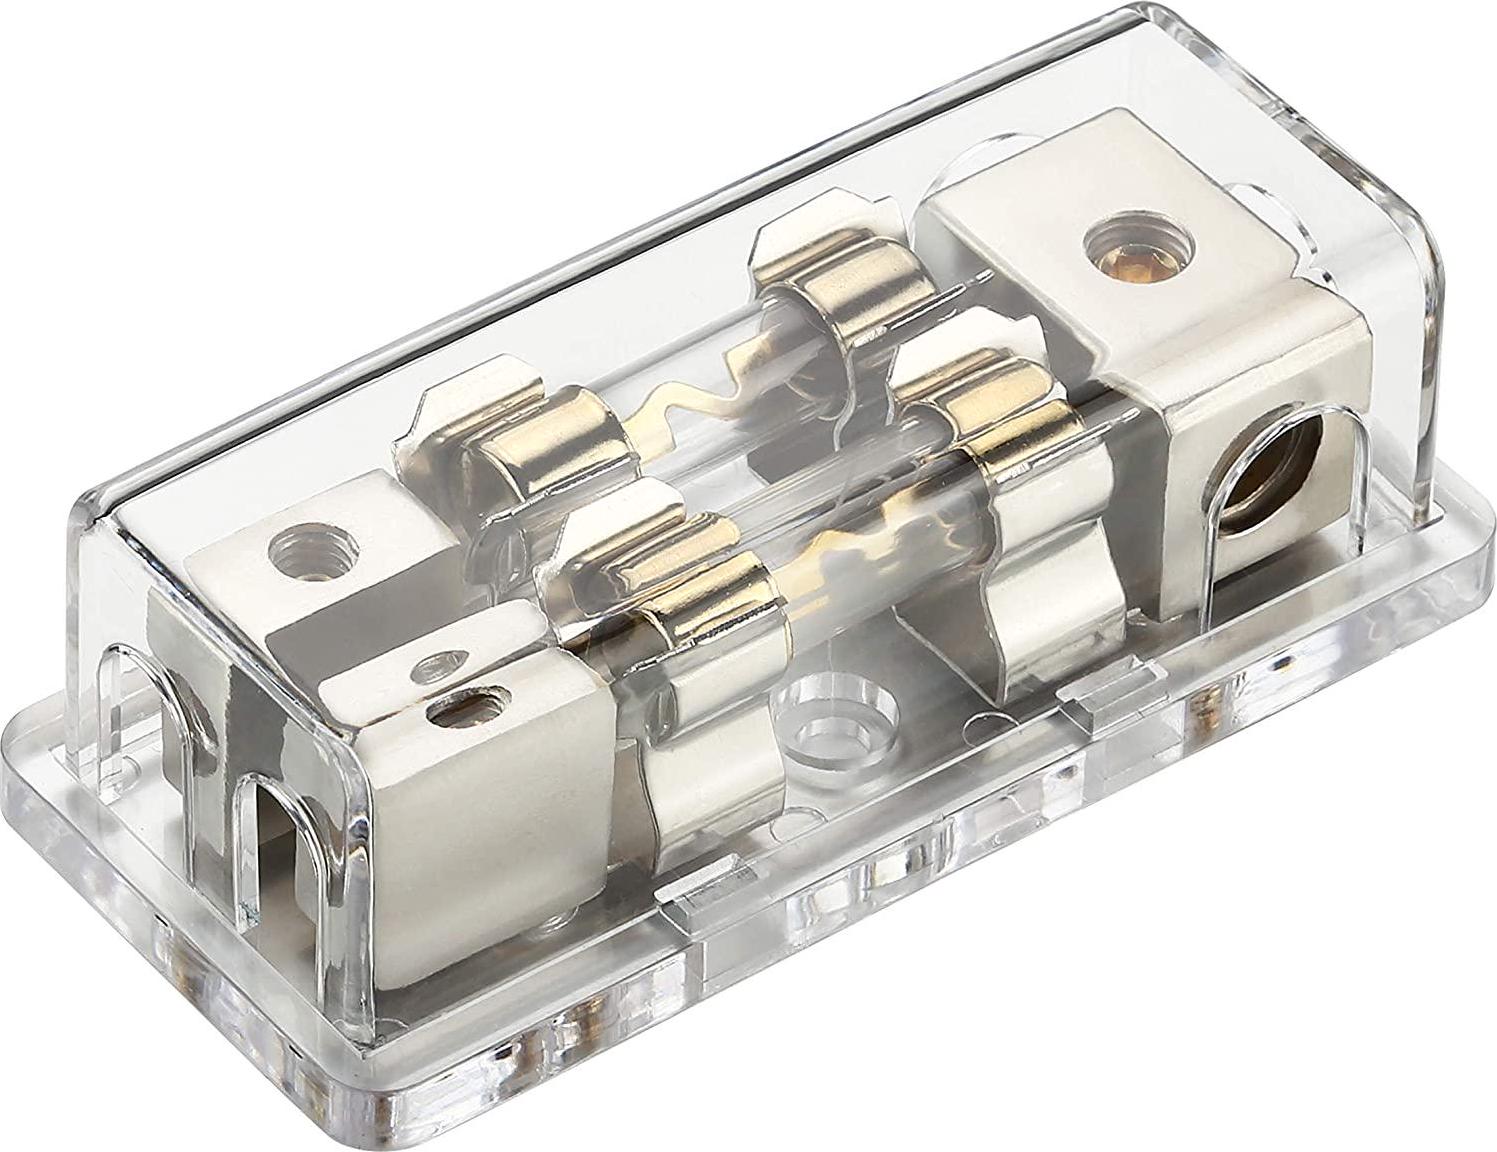 Freajoin, Freajoin 4/8 Gauge AWG AGU Fuse Holder Fused Distribution Block 4 Gauge in to 2 x 8 Gauge Out with 2PCS 100A Gold-Plated Fuses